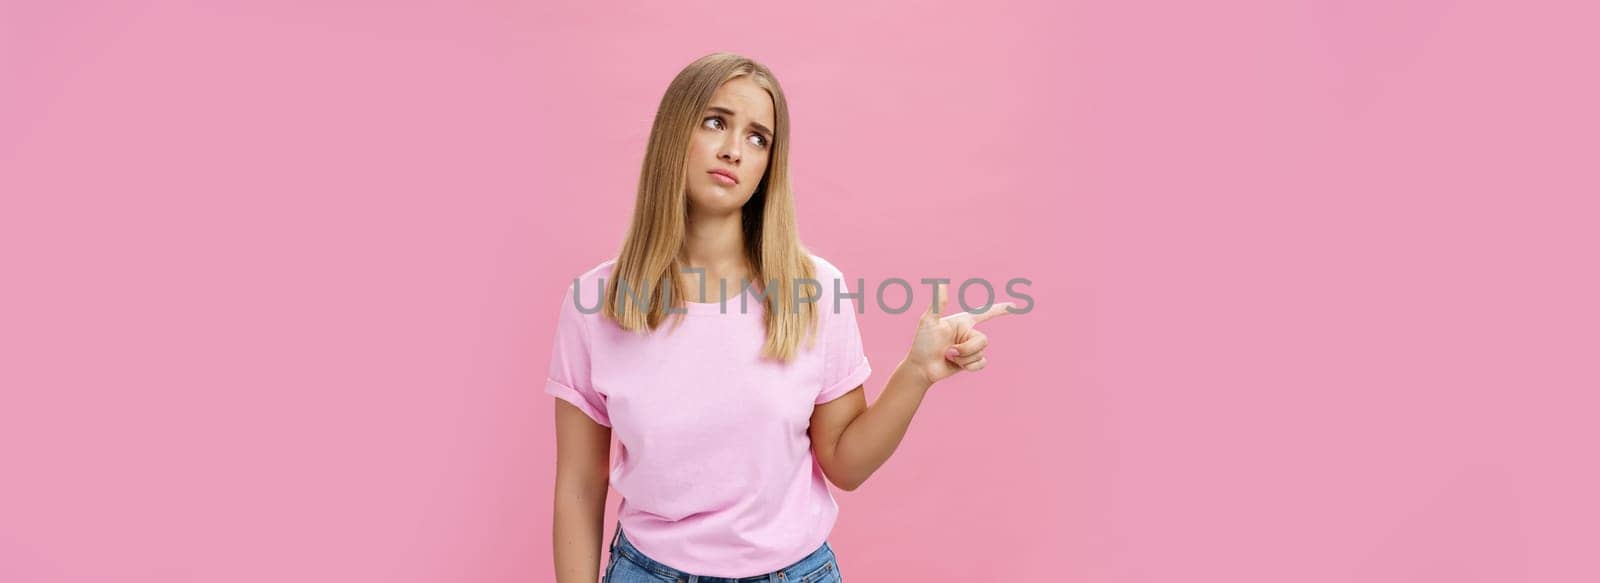 Envy upset cute young european woman with tanned skin and fair hait tilting head lifting eyebrows in sad silly look pointing, gazing left with regret and disappointment posing against pink background.